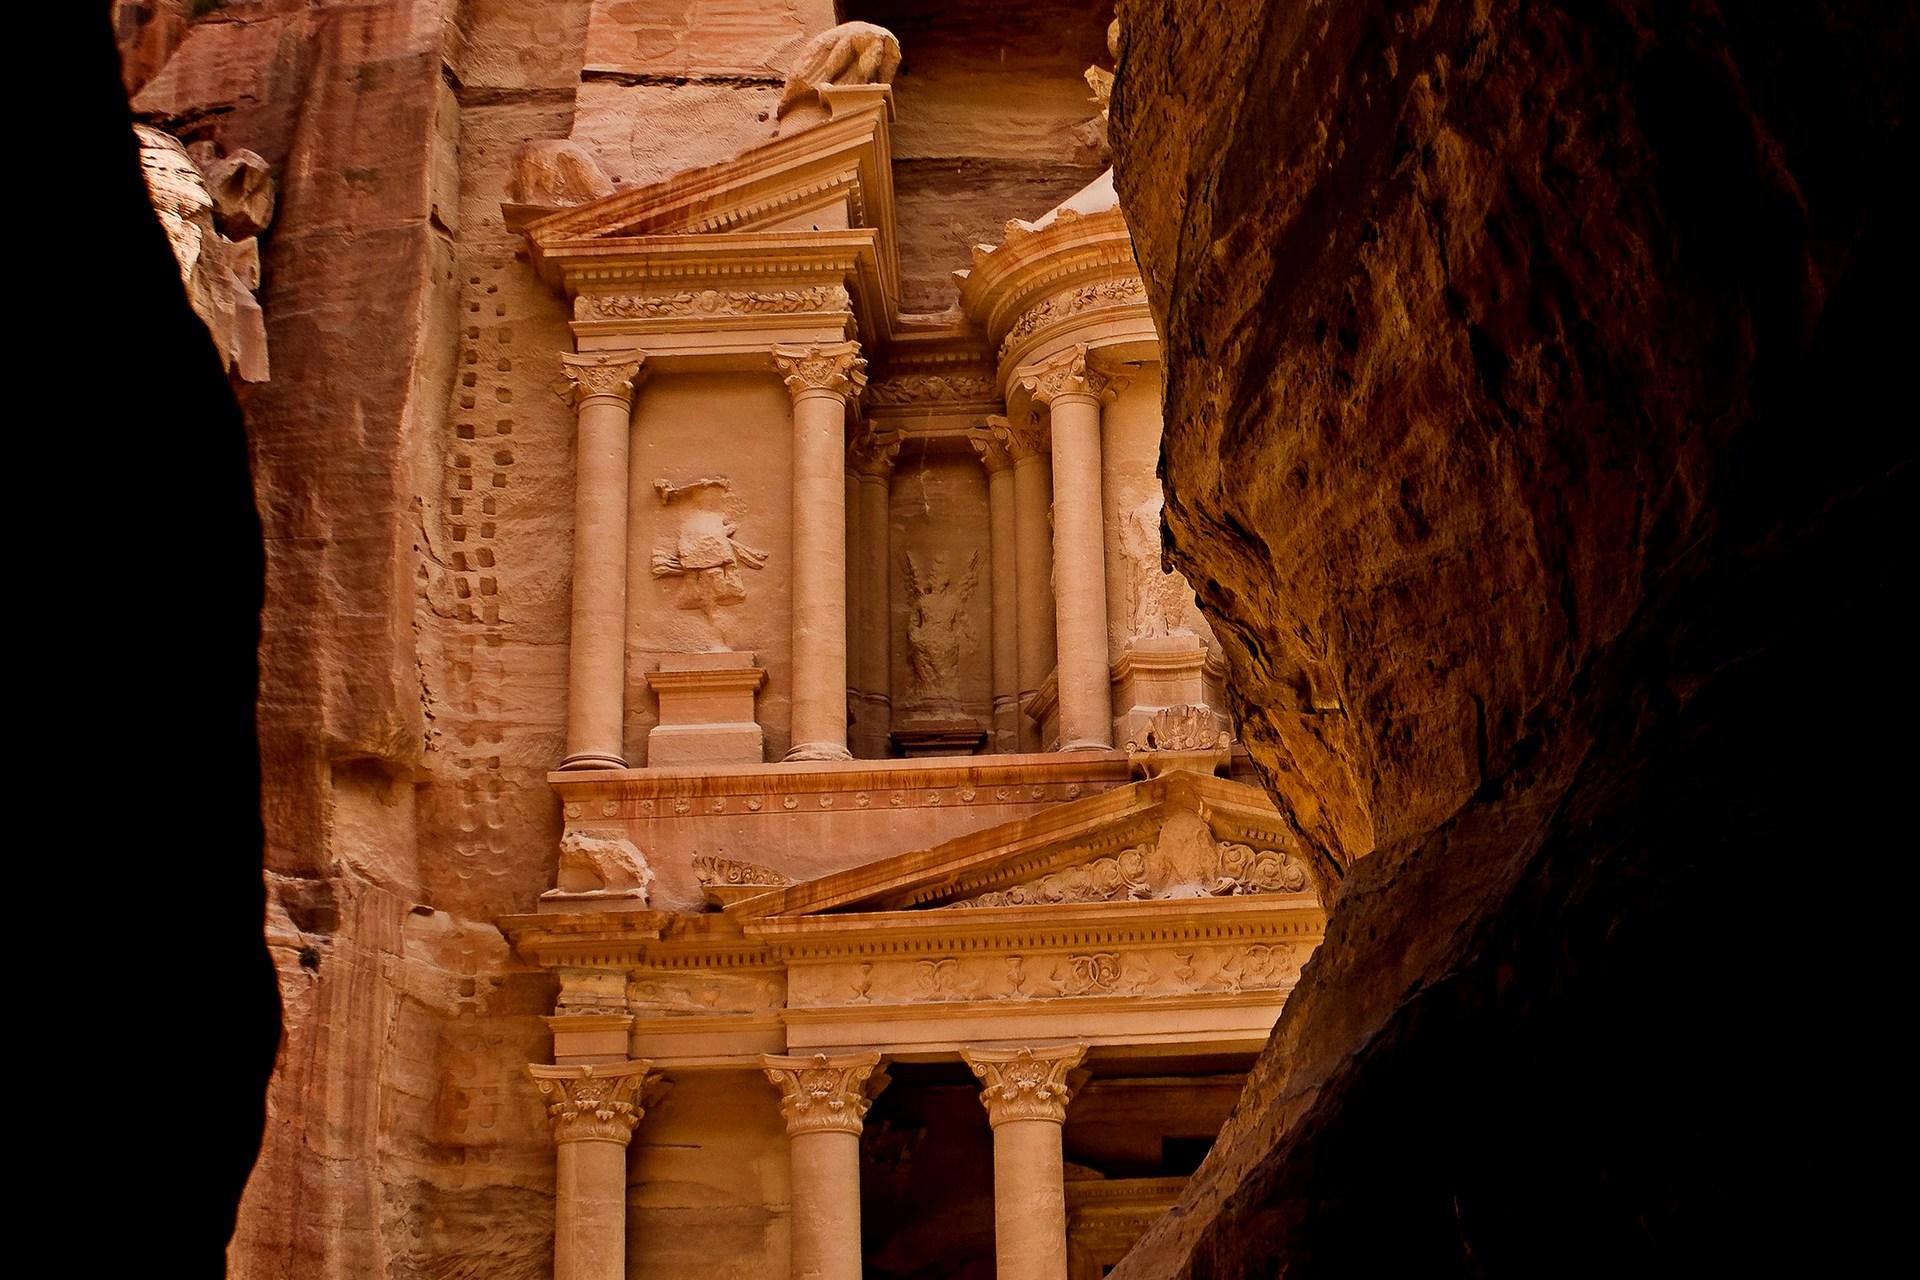 2-day trip; petra; via jordan travel; tours; middle east; jordan; historic site; ancient city; rock-cut architecture; rose city; archaeological site; tourist destination; world wonder; jordanian desert; nabatean kingdom; hiking trails; treasury building; jordan tourism; sightseeing; bedouin culture; adventure travel; explore petra; group tours; private tours; guided tours; vacation package; travel experience; wanderlust; travel bucket list; solo travel; travel itinerary; cultural heritage; UNESCO world heritage site; historical landmarks; ancient civilization; architectural marvel; hidden city; rose-red city; archaeological exploration; ancient history; desert landscape; jordanian history; sacred sites; cultural tour; temple ruins; cave dwellings; ancient monuments; photo opportunities; cliff faces; archeological wonder; world heritage site; holiday destination; outdoor adventure; ancient ruins; historical tour; tailor-made tours; iconic site; rose city tour; petra exploration; jordan history; historical context; hiking expedition; architectural grandeur; petra treasury; travel agency; local guide; sightseeing tour; petra tombs; ancient culture; travel package; historical site; jordanian landmarks; adventure tour; must-visit destination; jordan vacation; travel destination; petra adventure; historical experience; cultural exploration; guided excursions; middle eastern travel; tourist attraction; lost city; biblical history; travel deal; travel specials; vacation spot; ancient wonders; jordan sightseeing; desert adventure; travel options; outdoor exploration; hidden gem; jordanian tours; historical discovery; ancient wonders.